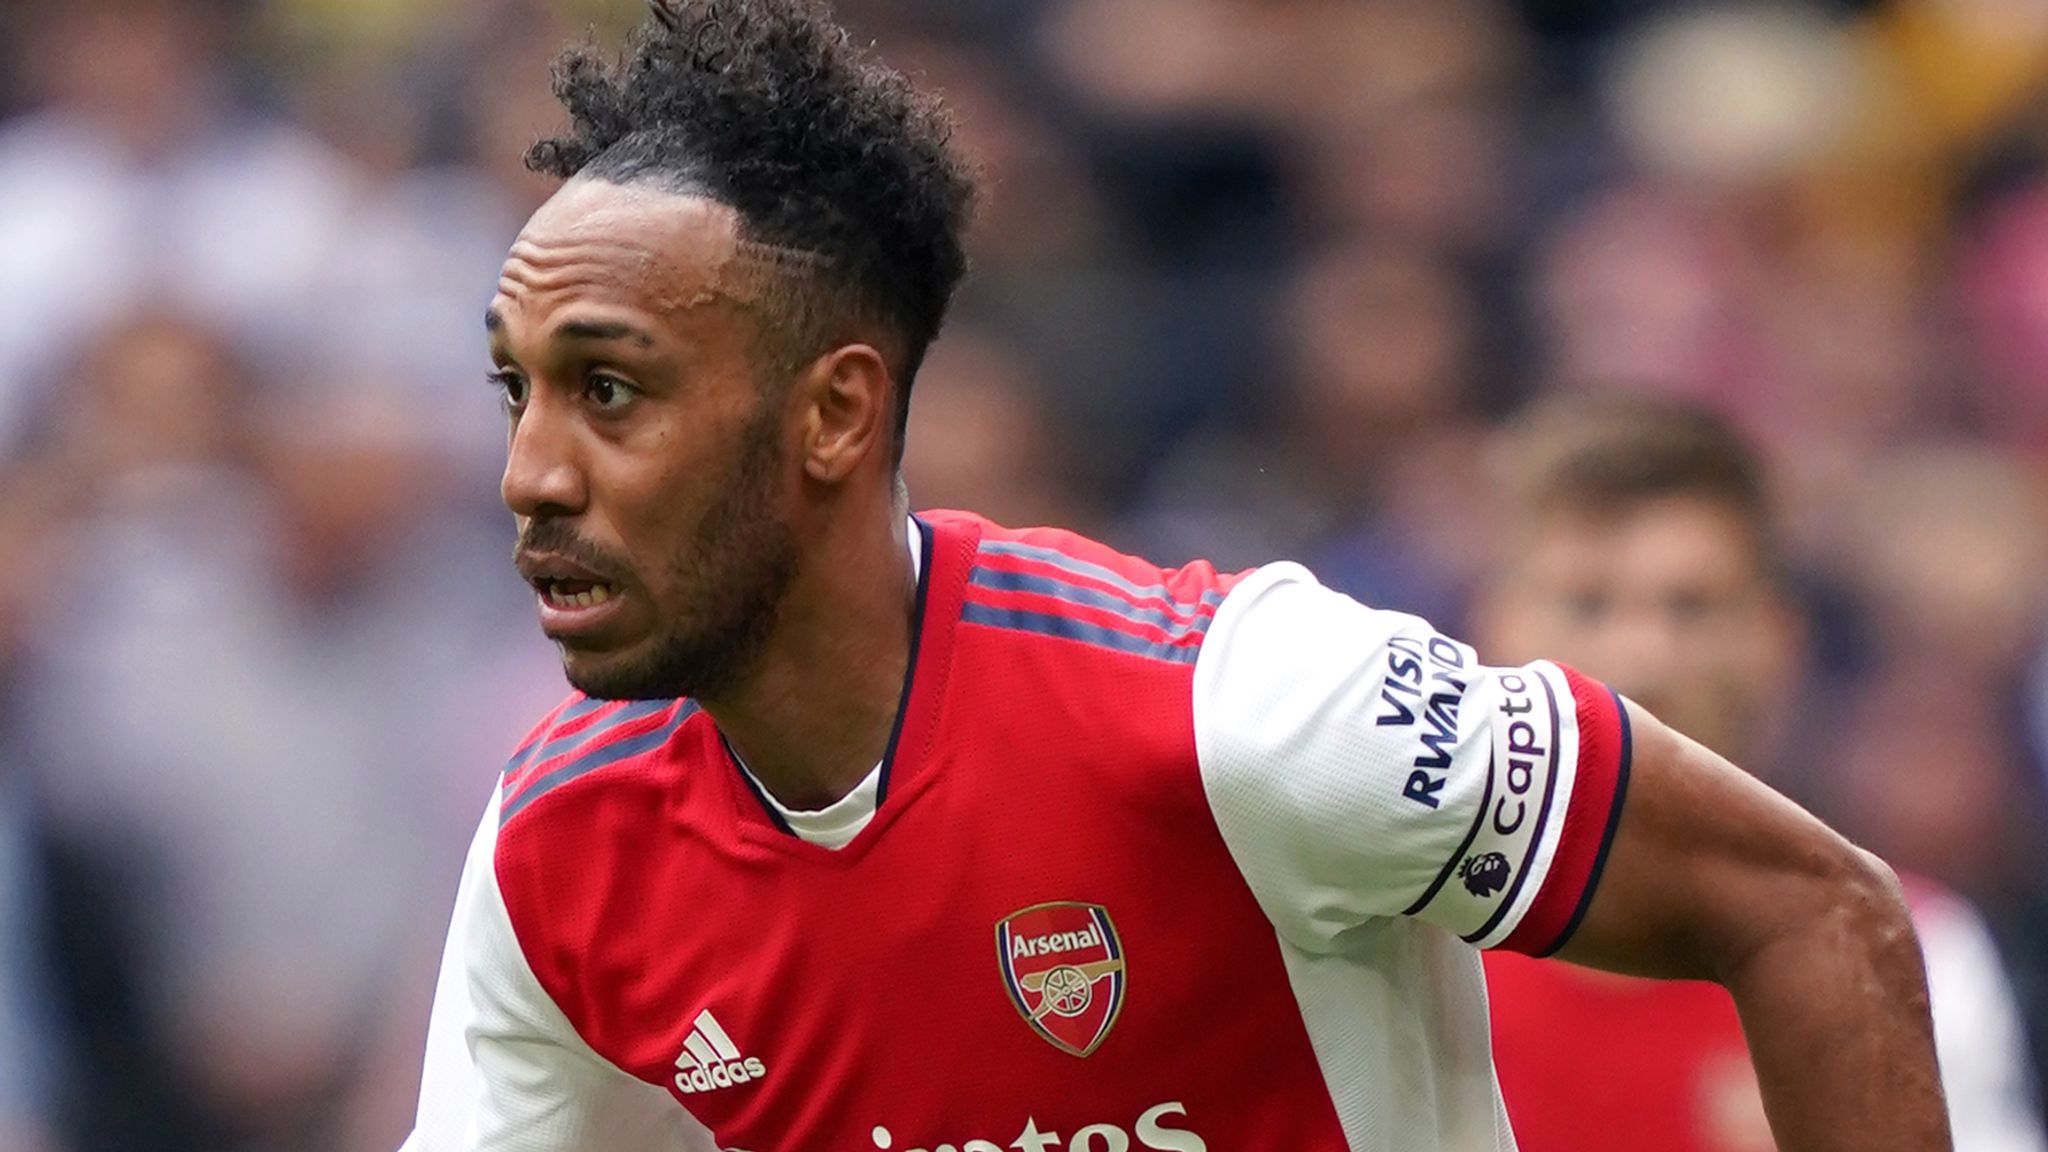 Transfer Talk podcast: Arsenal assessed - Pierre-Emerick Aubameyang, Aaron Ramsdale and more | Football News | Sky Sports